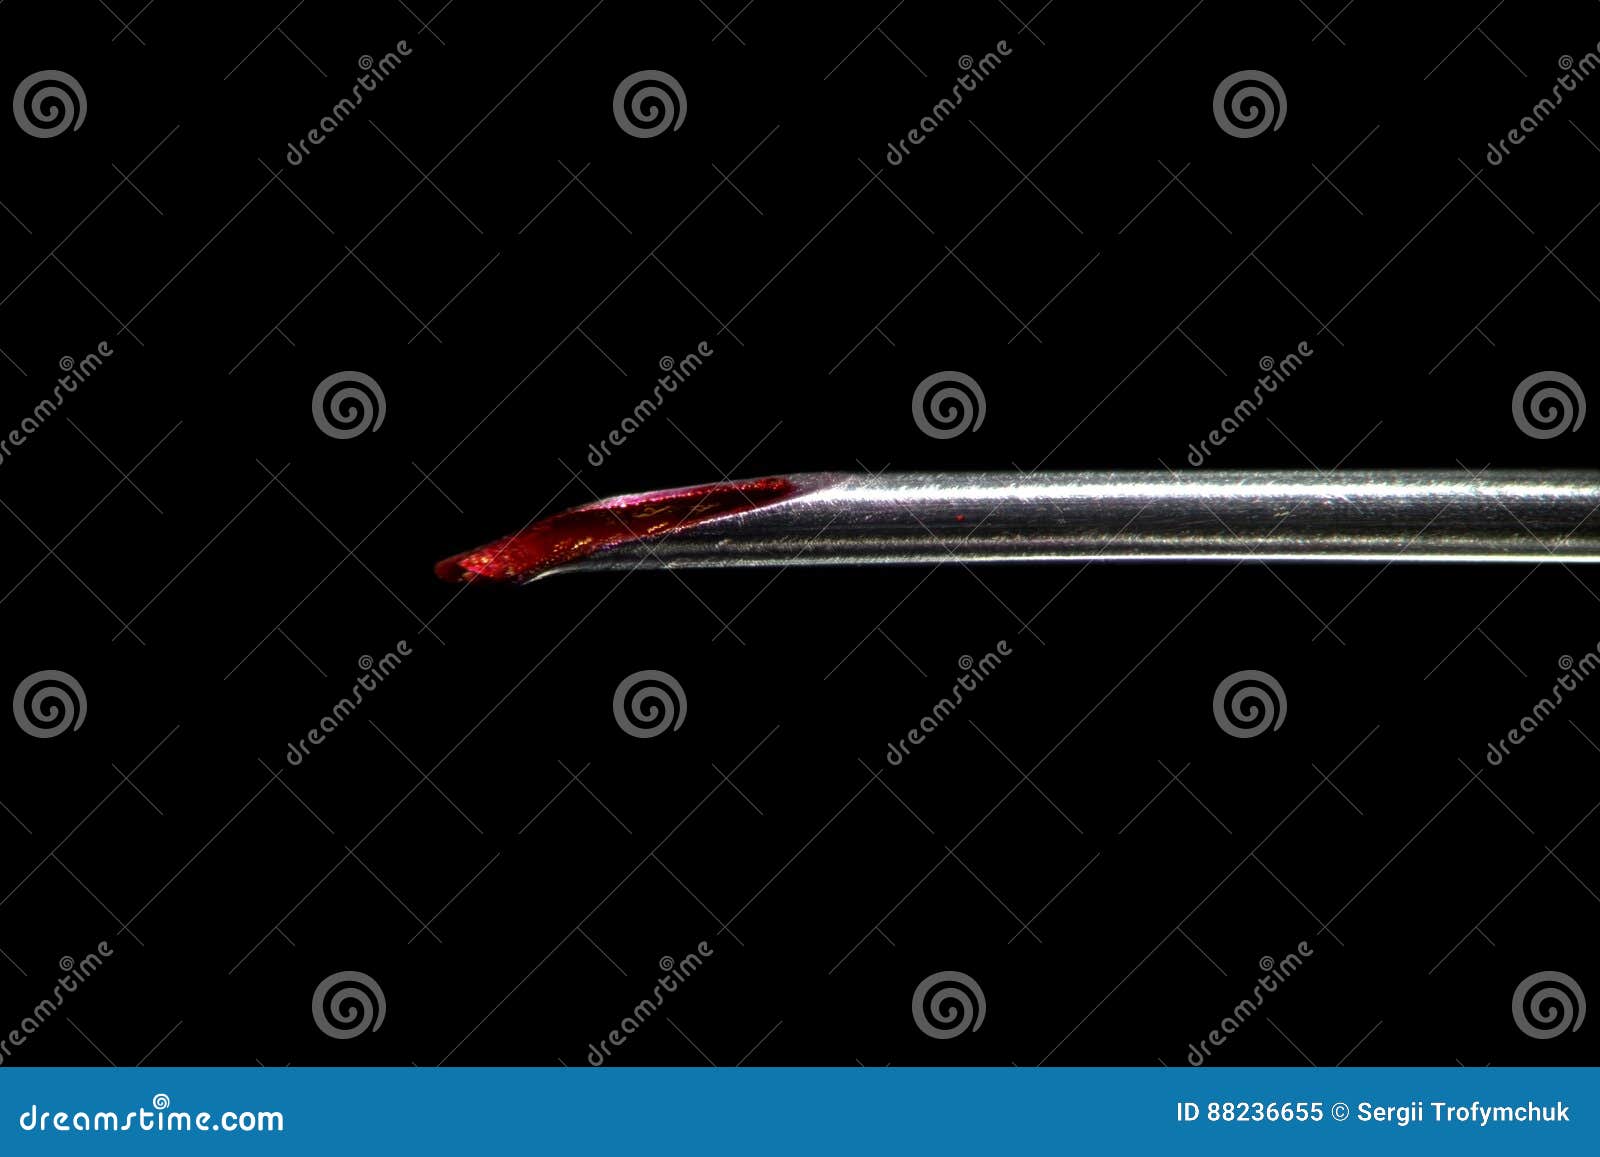 Dirty Medical Needle Tip. Blood in Canal Not Sterile Used Syringe ...